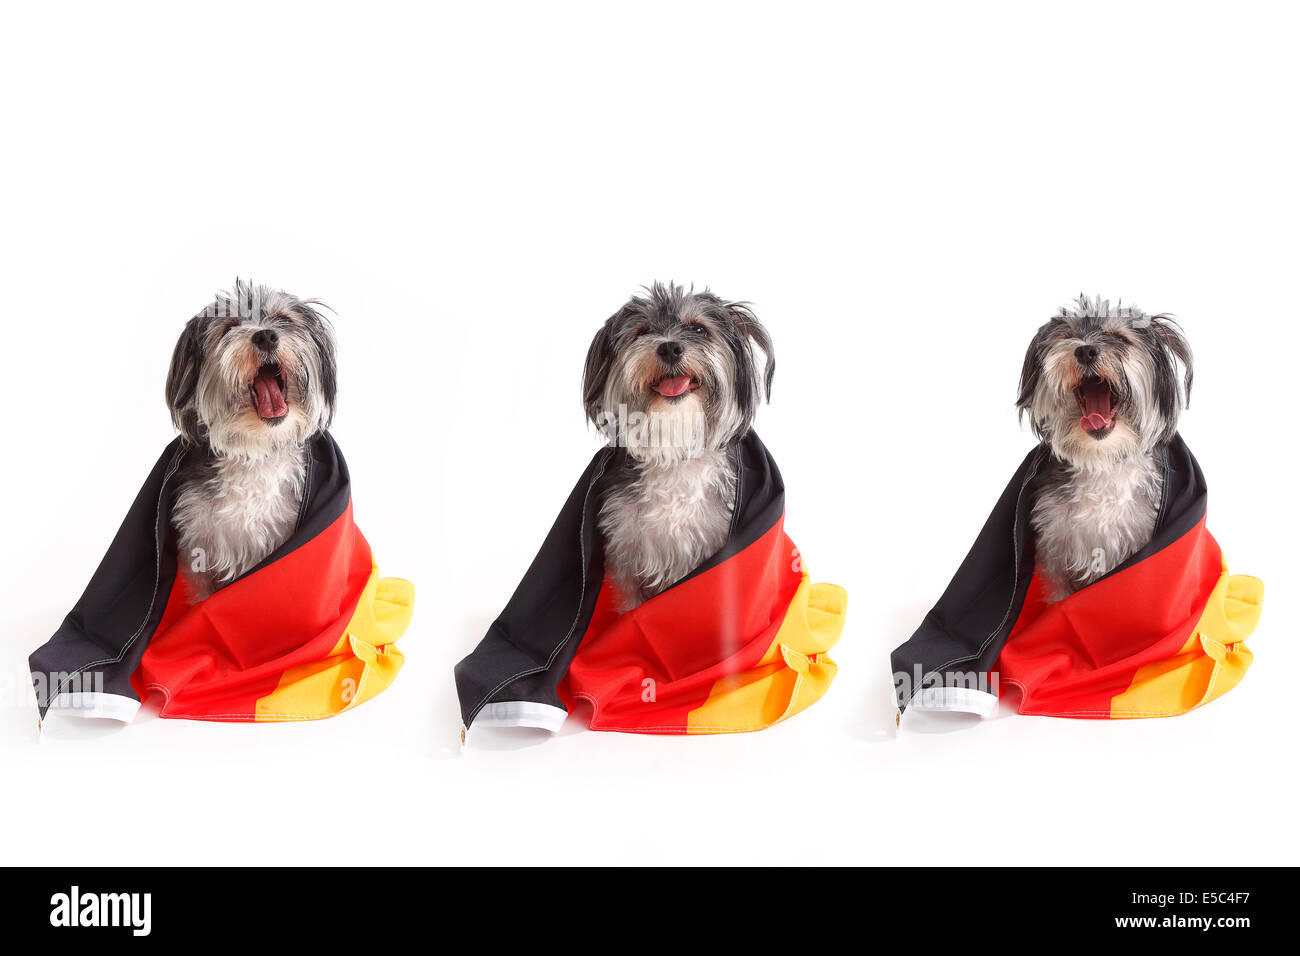 Dogs with German flag shout in front of a white background Stock Photo